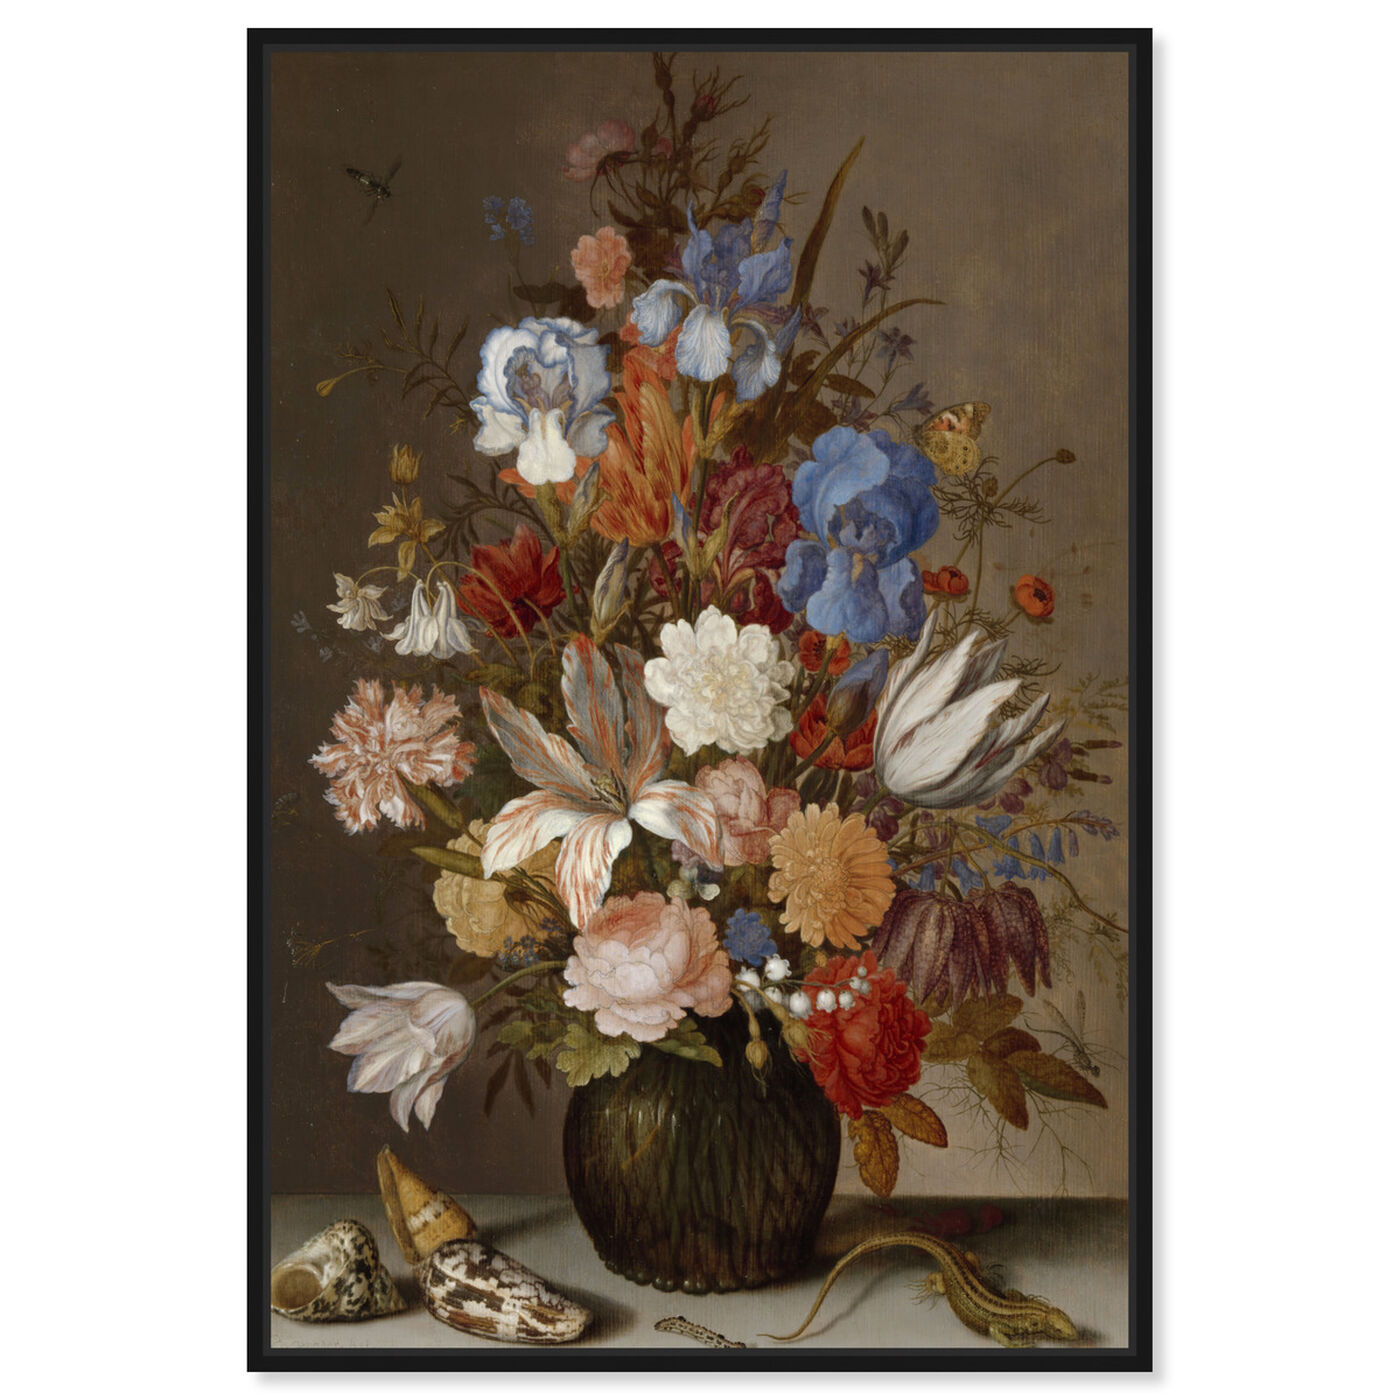 Oliver Gal Bouquet In Trunk On Canvas Painting